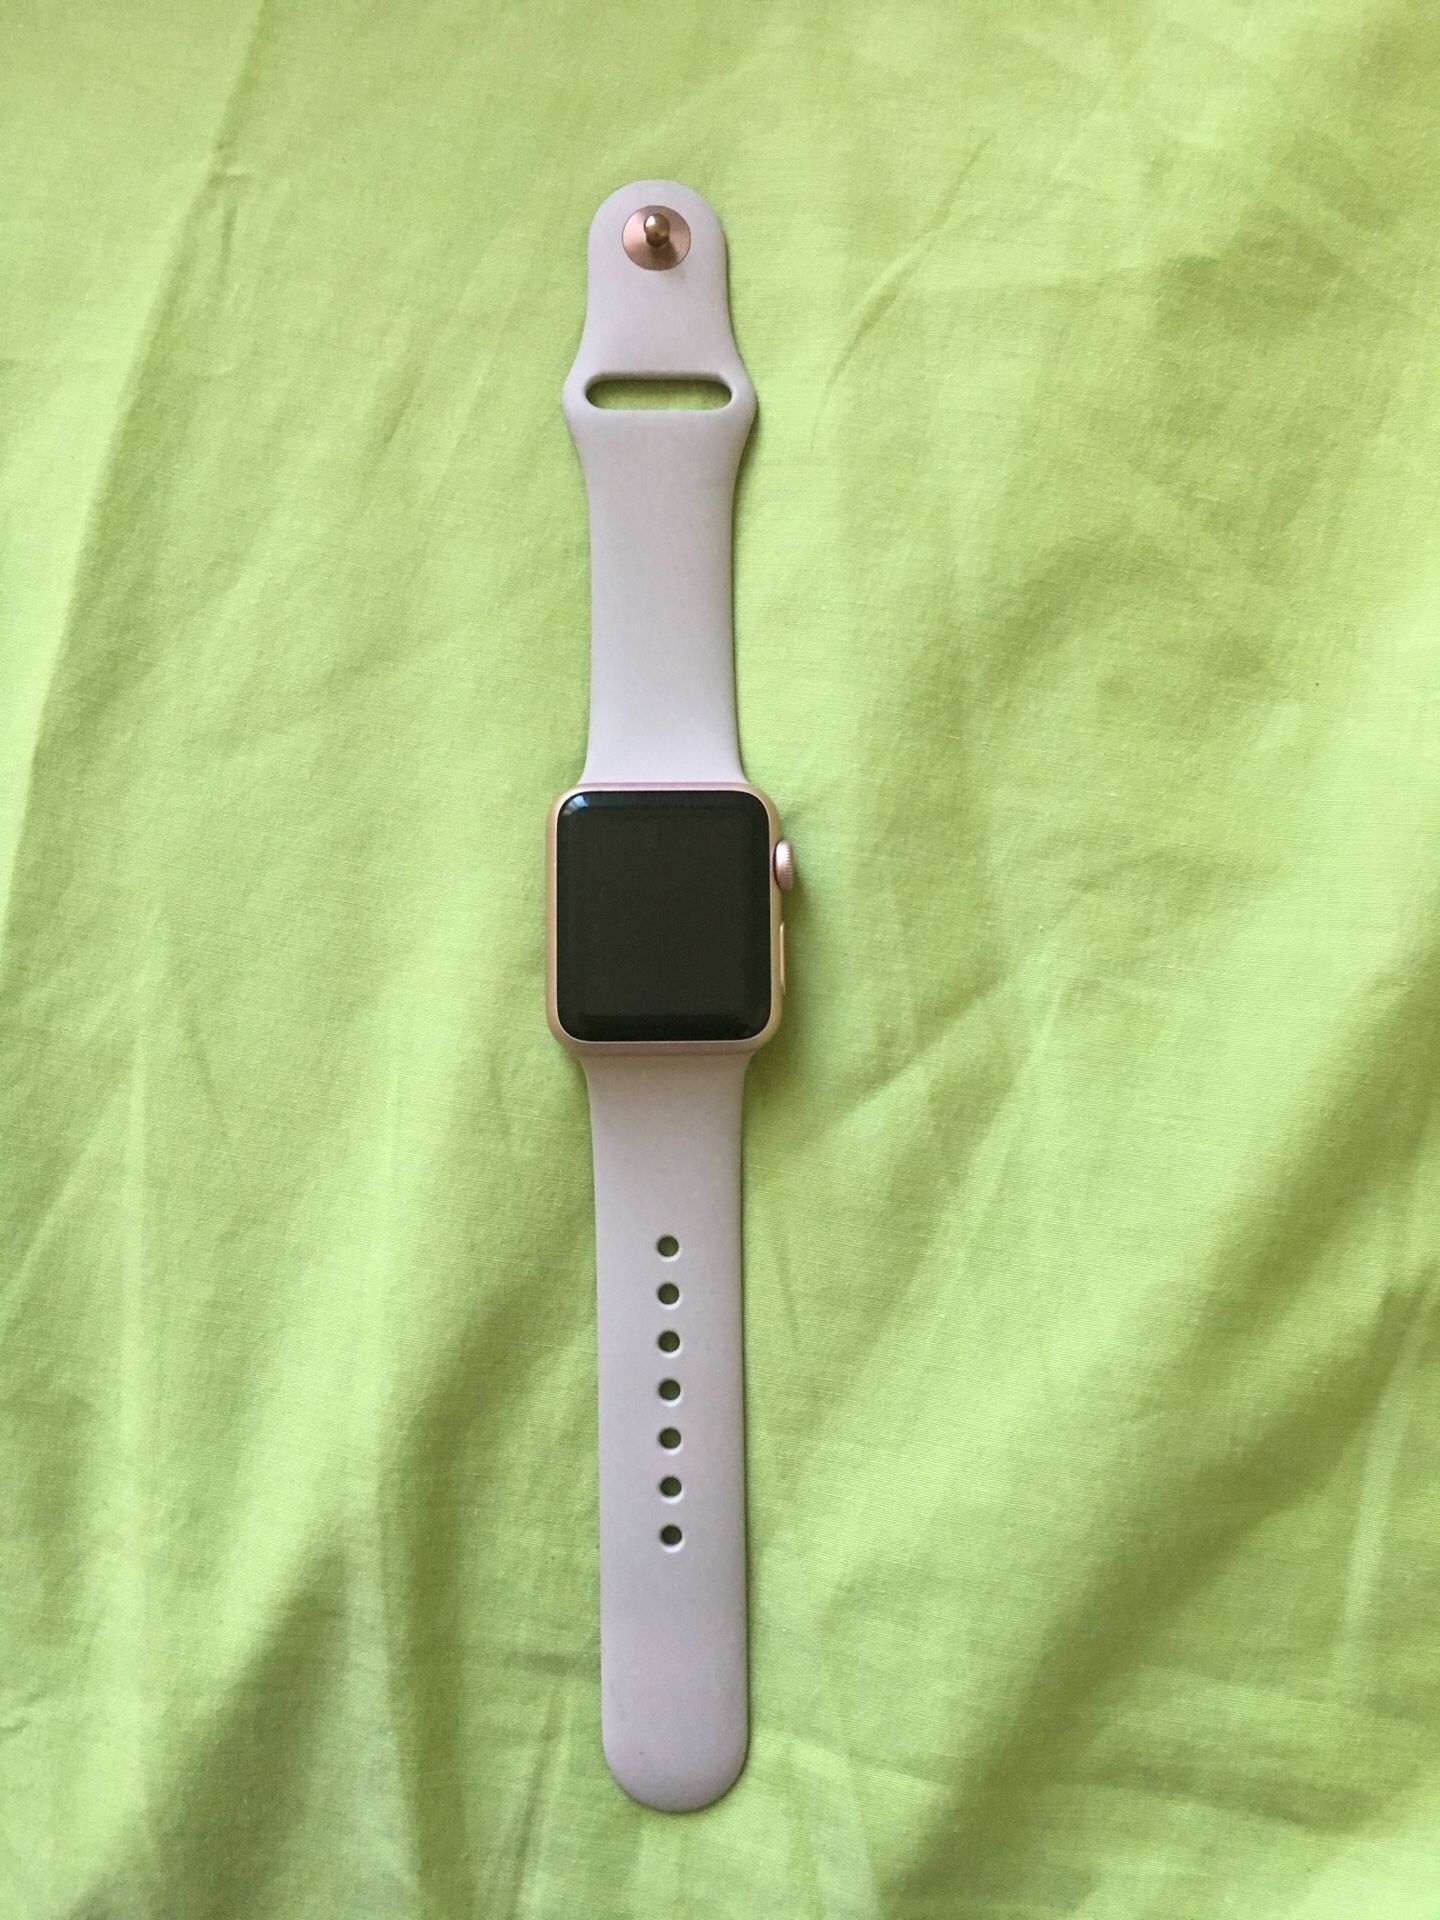 Apple Watch 1st generation Rose gold. Doesn’t include charger.